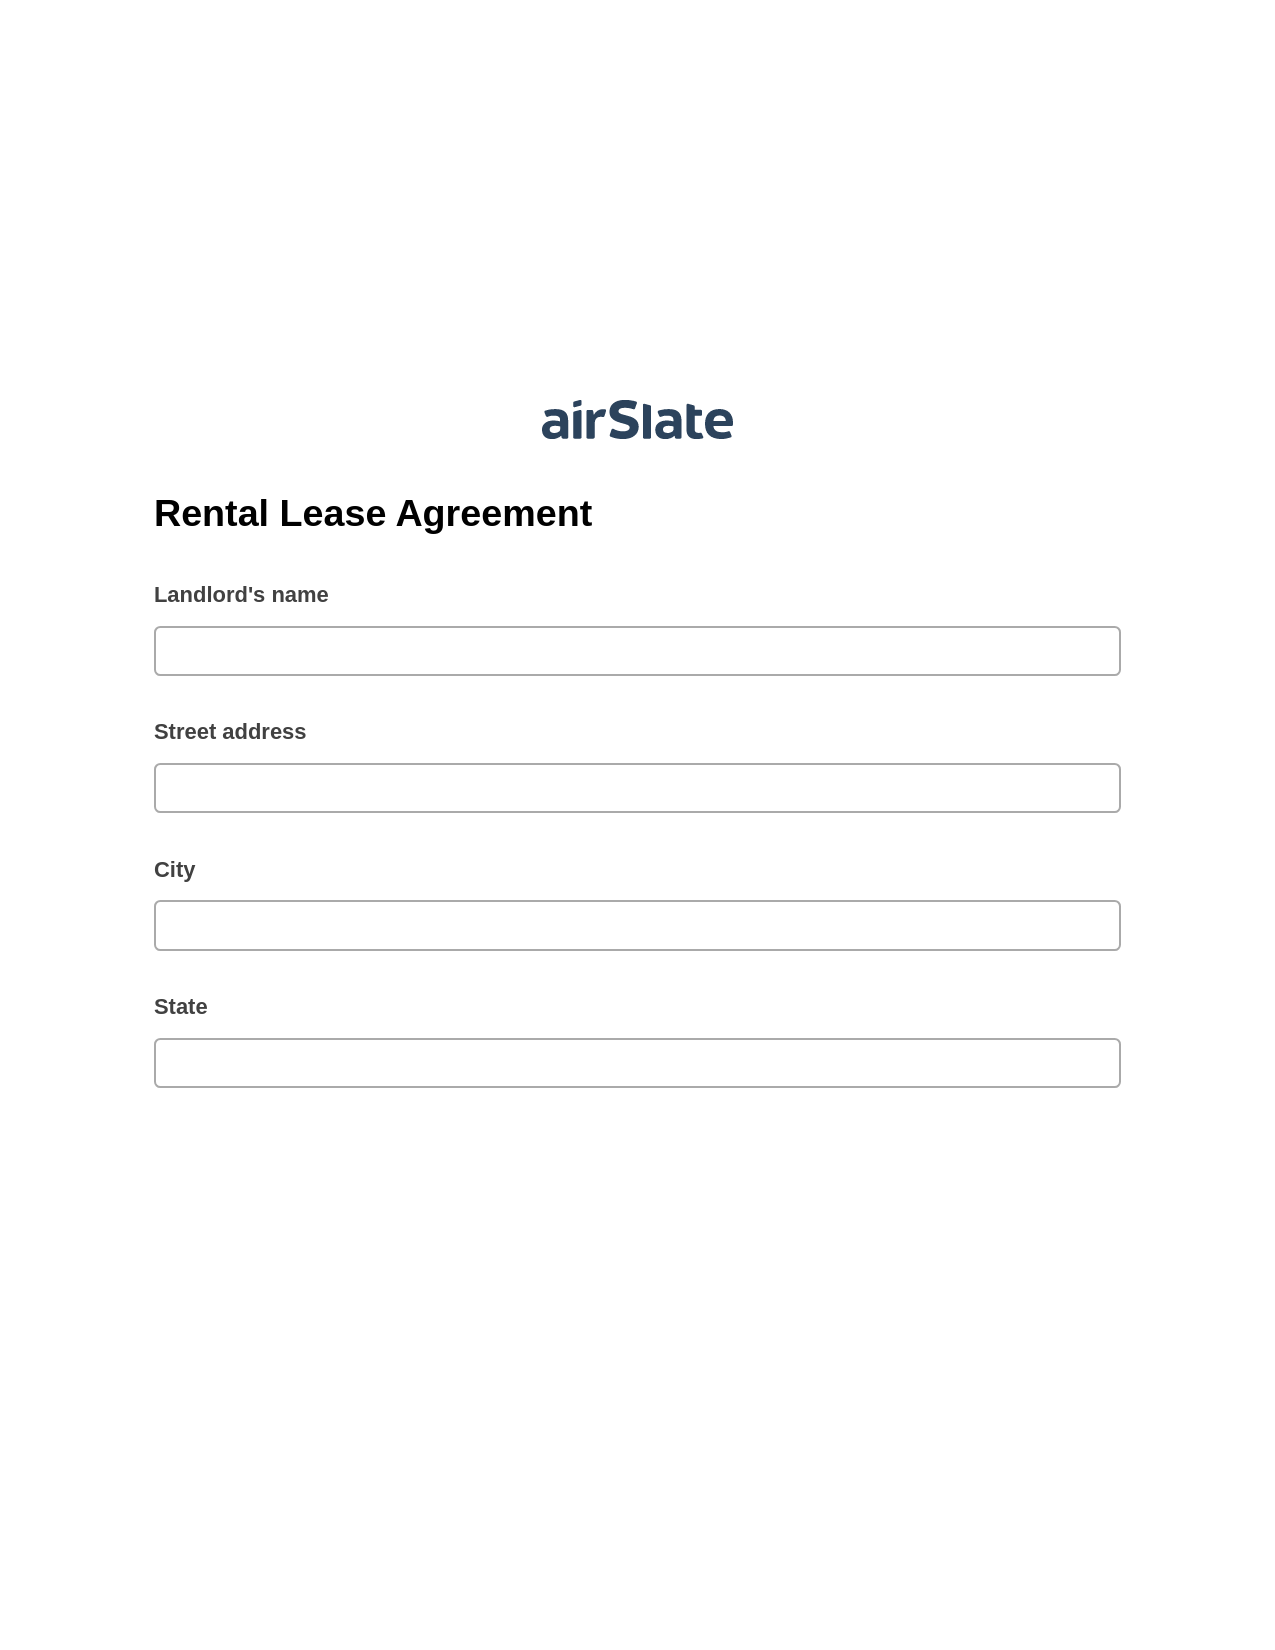 Rental Lease Agreement Pre-fill from CSV File Bot, Google Cloud Print Bot, Export to NetSuite Record Bot